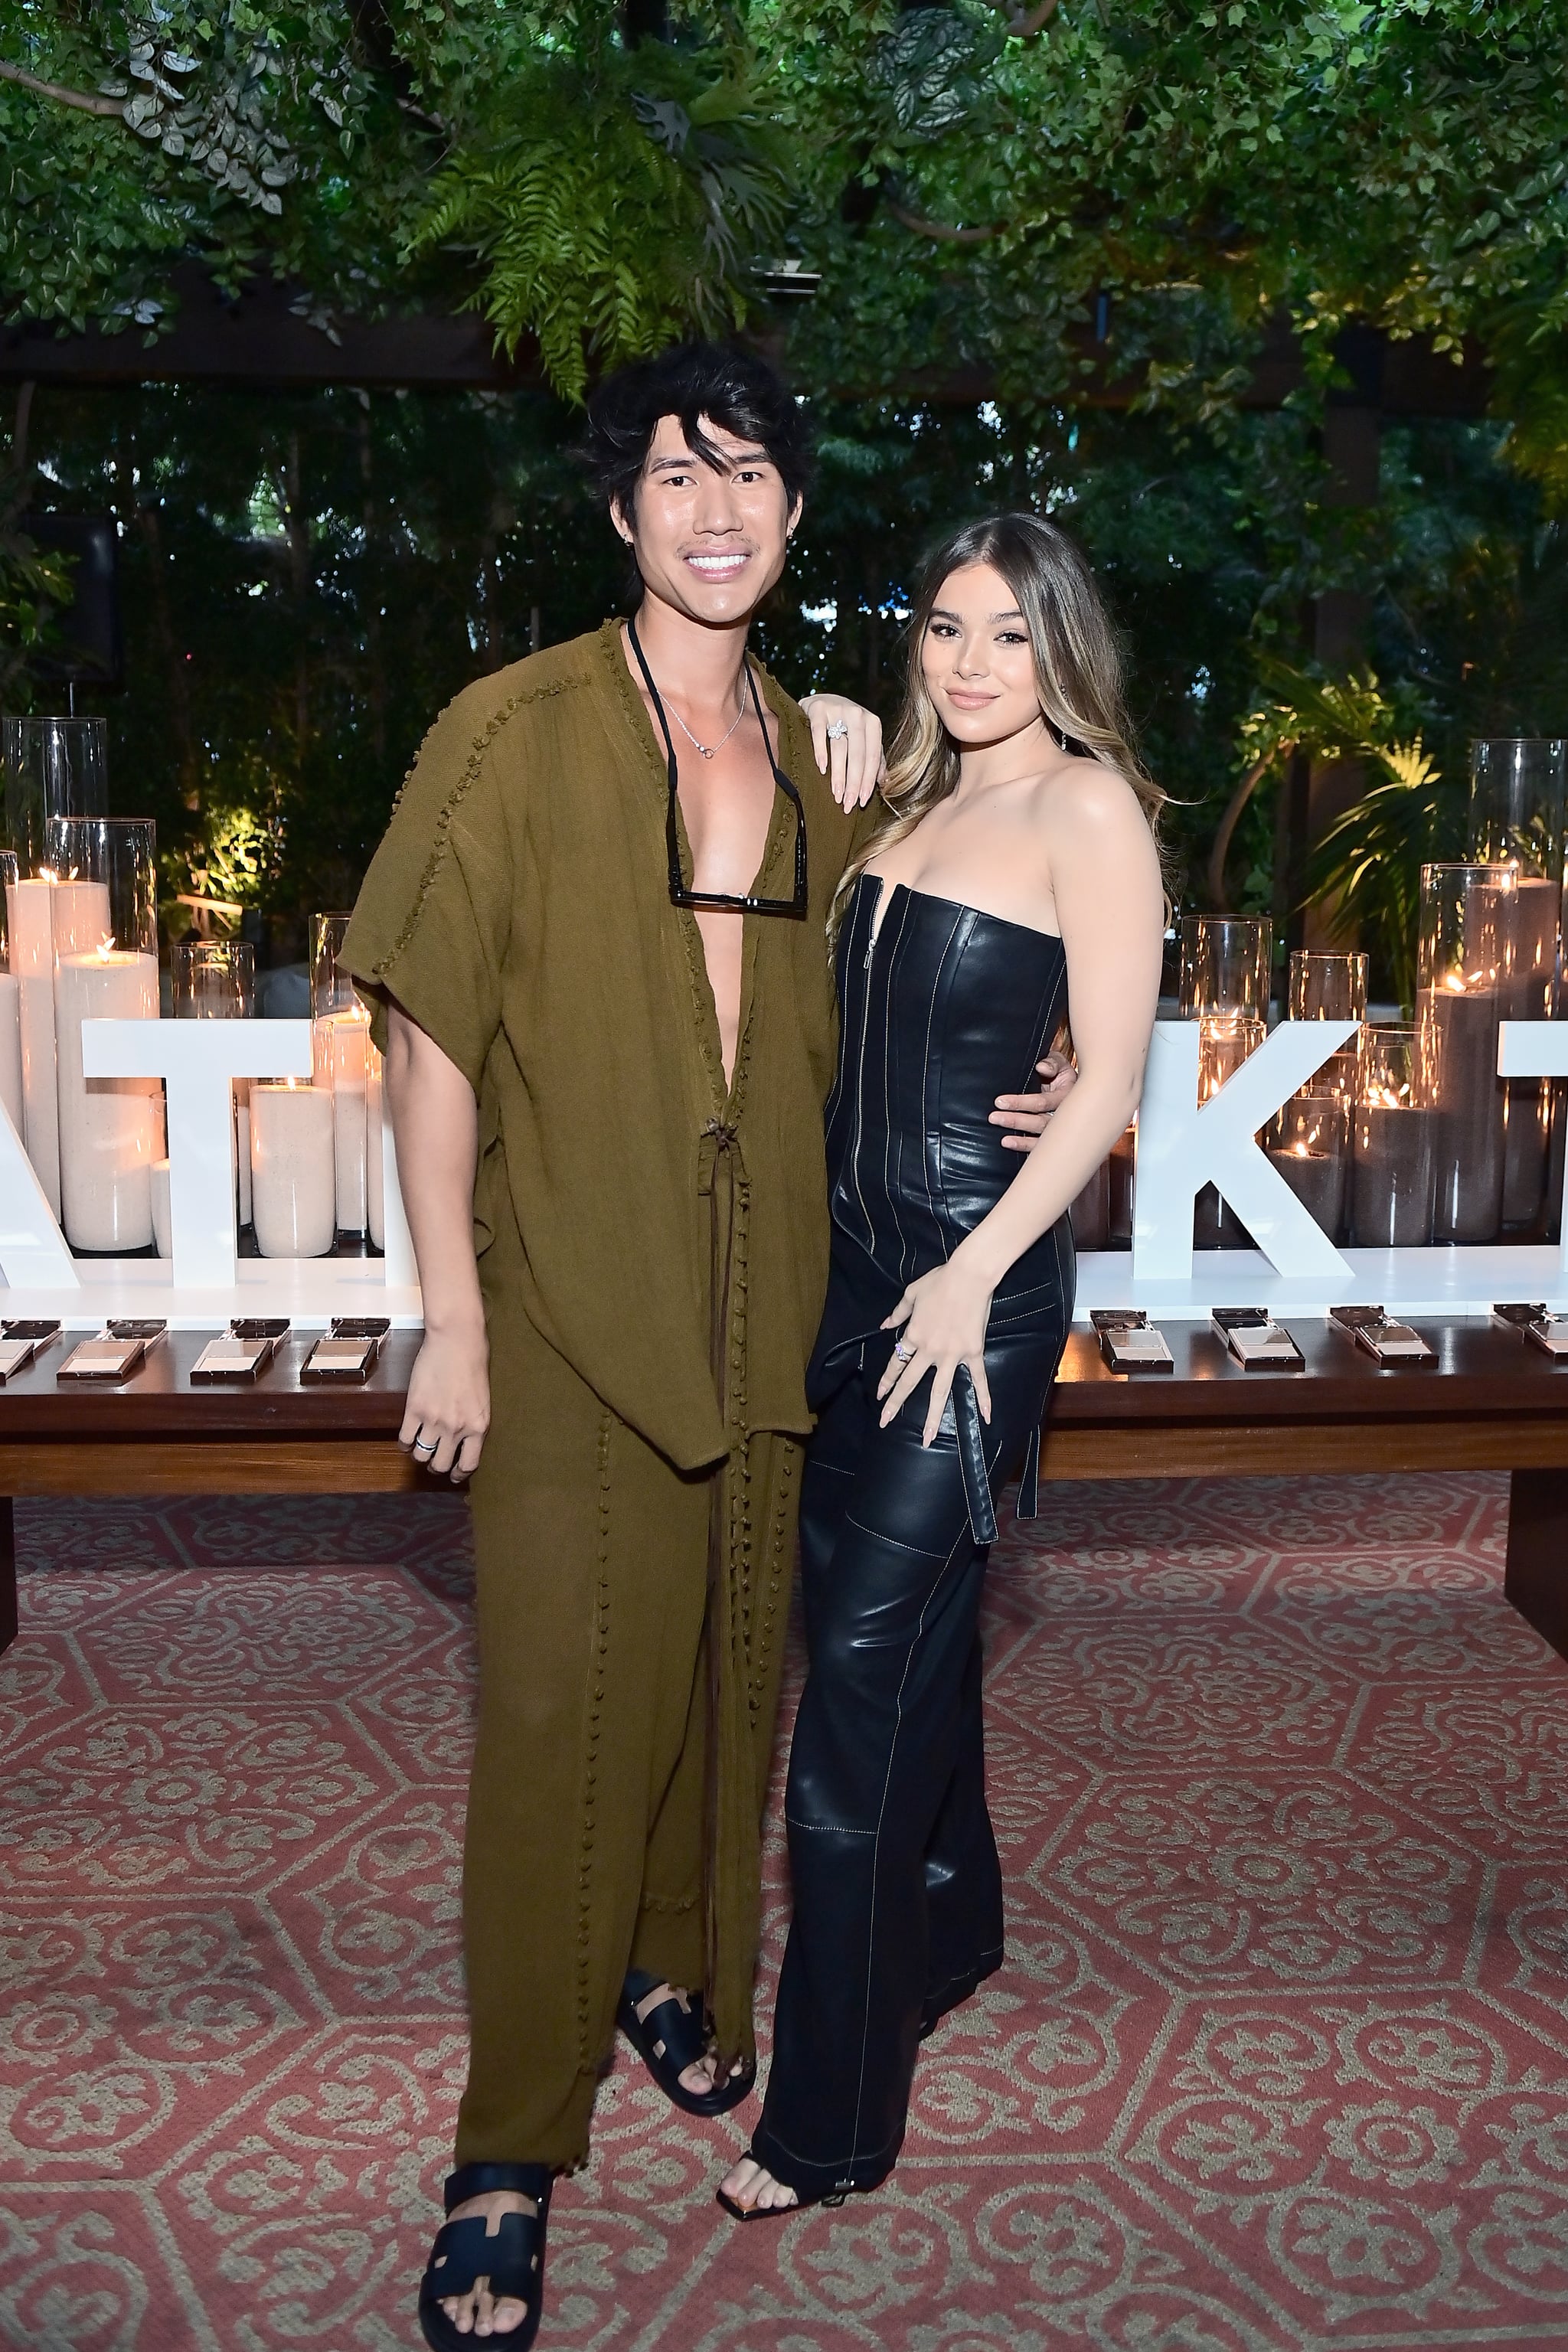 WEST HOLLYWOOD, CALIFORNIA - AUGUST 29: (L-R) Patrick Ta and Hailee Steinfeld attend Patrick Ta Beauty's Major Skin Launch at The West Hollywood EDITION on August 29, 2022 in West Hollywood, California. (Photo by Stefanie Keenan/Getty Images)